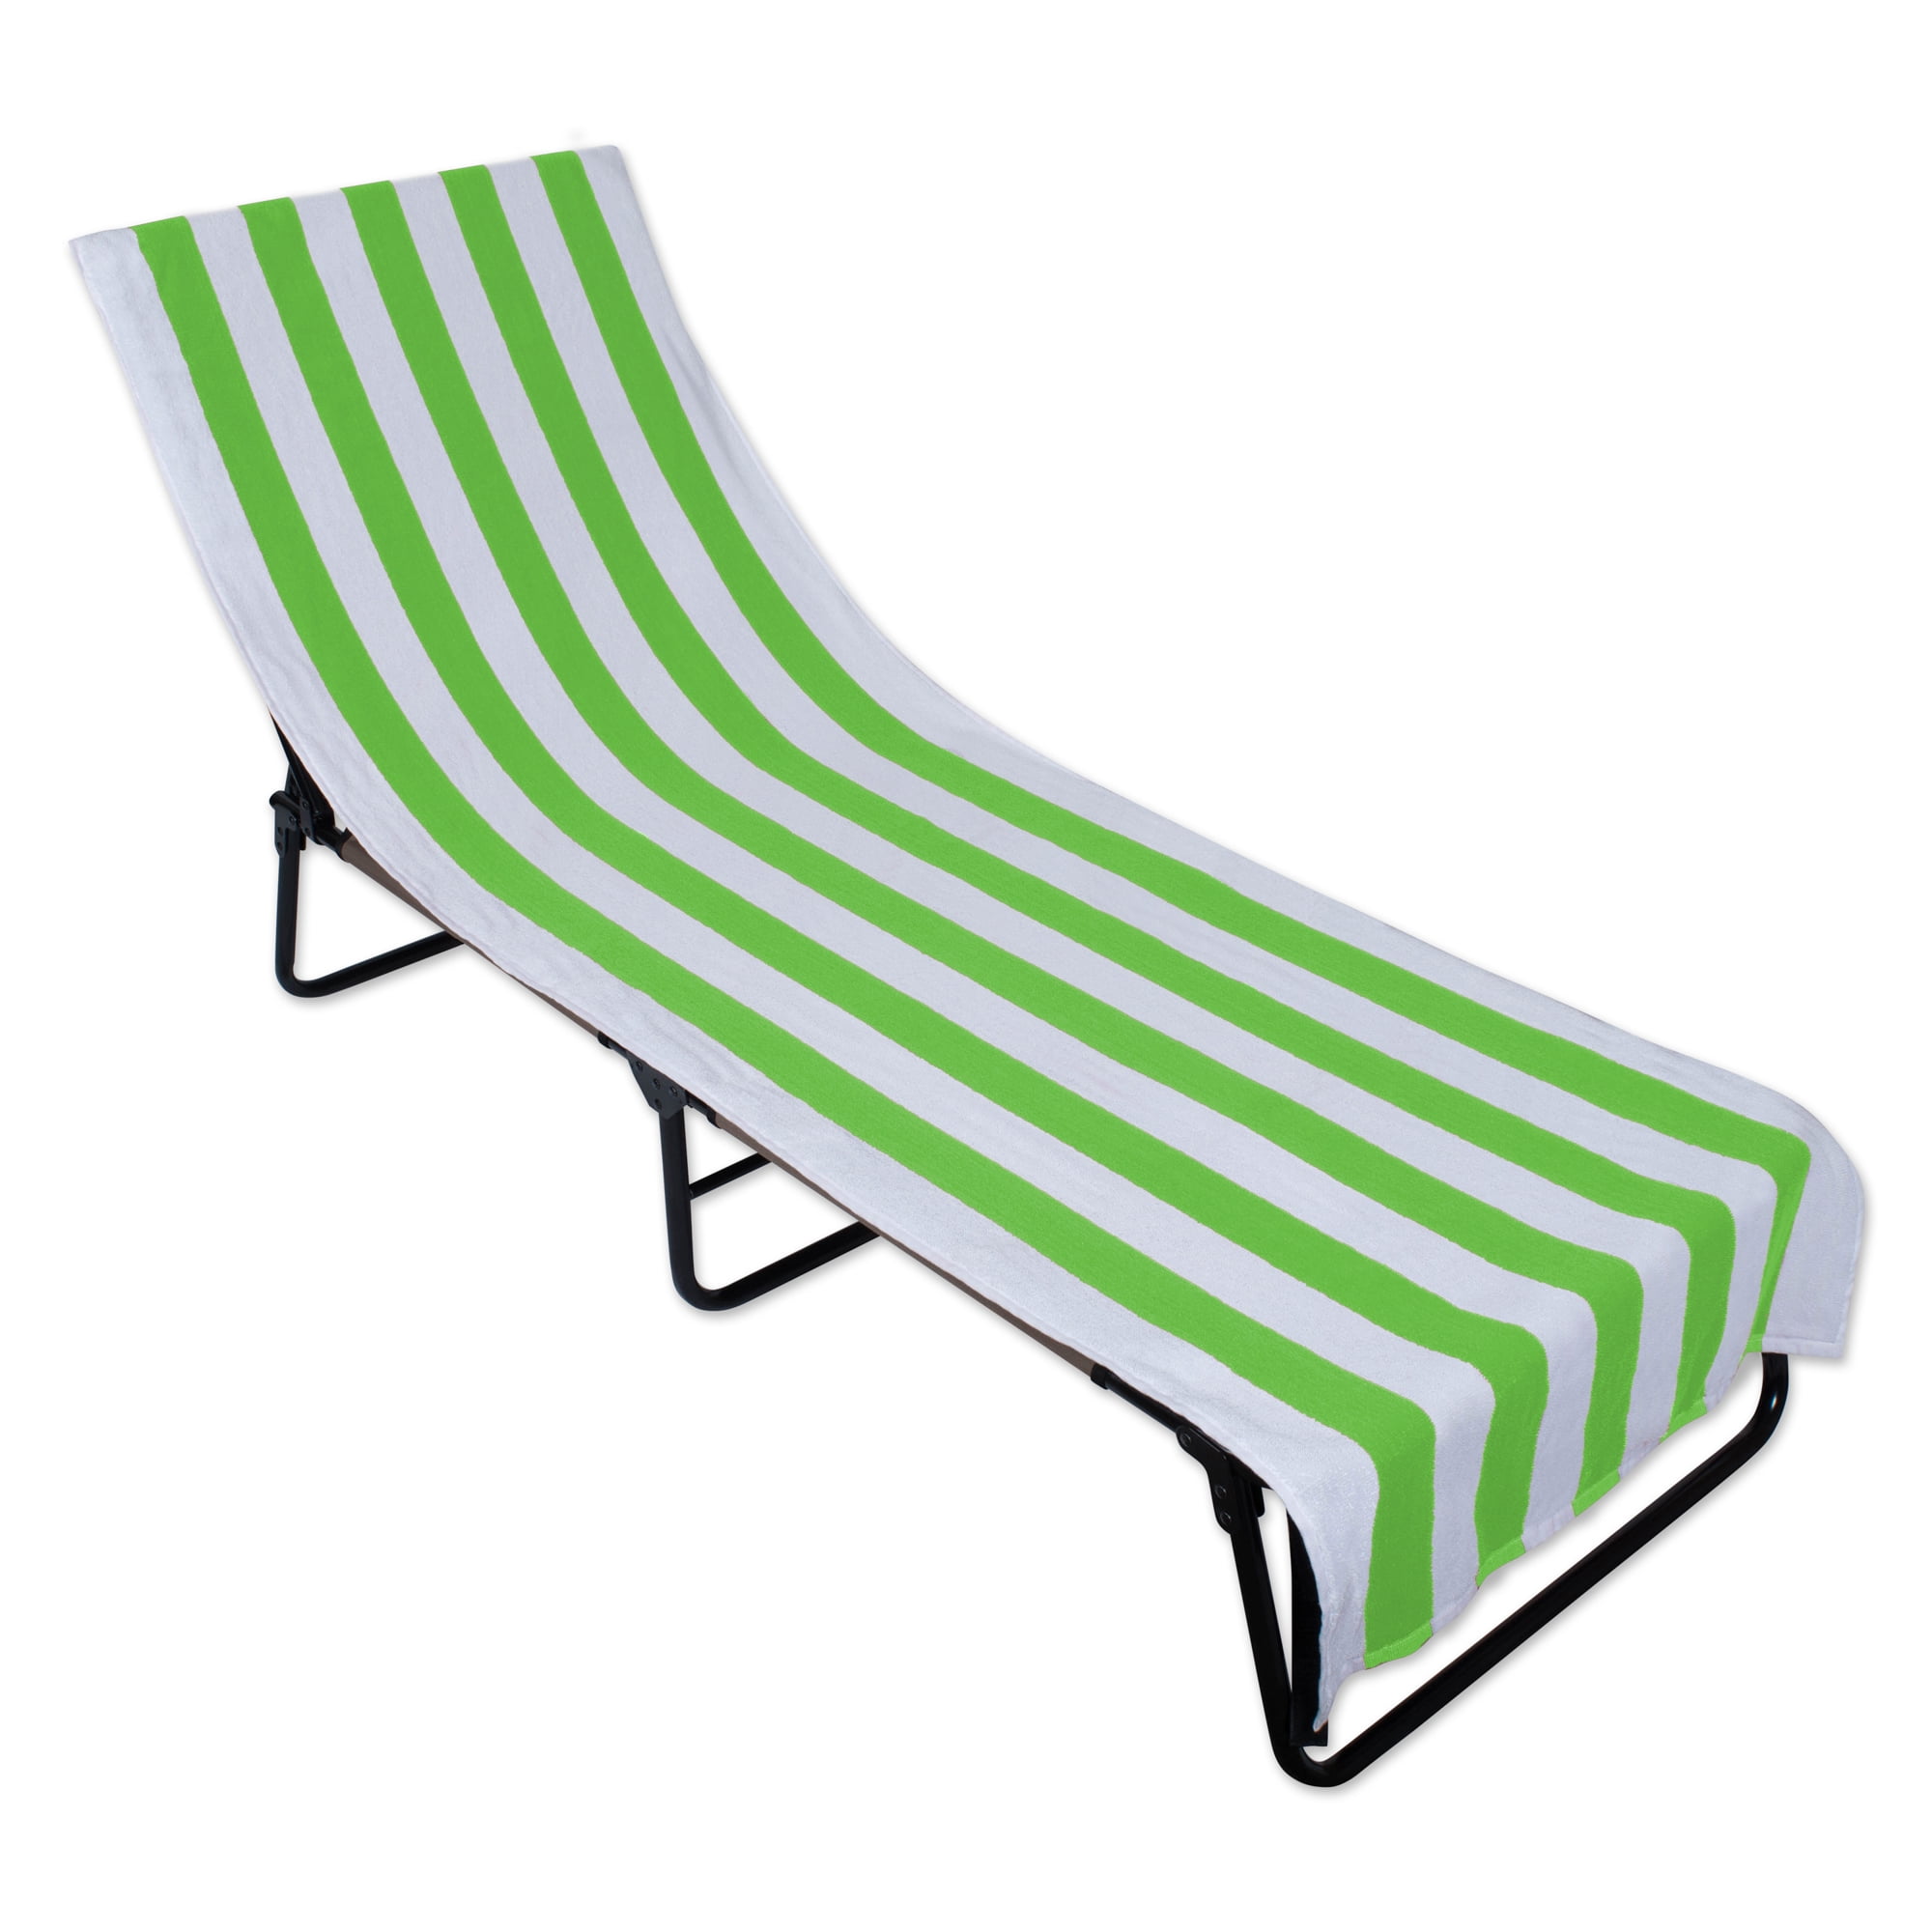 Creatice Green Beach Chair for Large Space